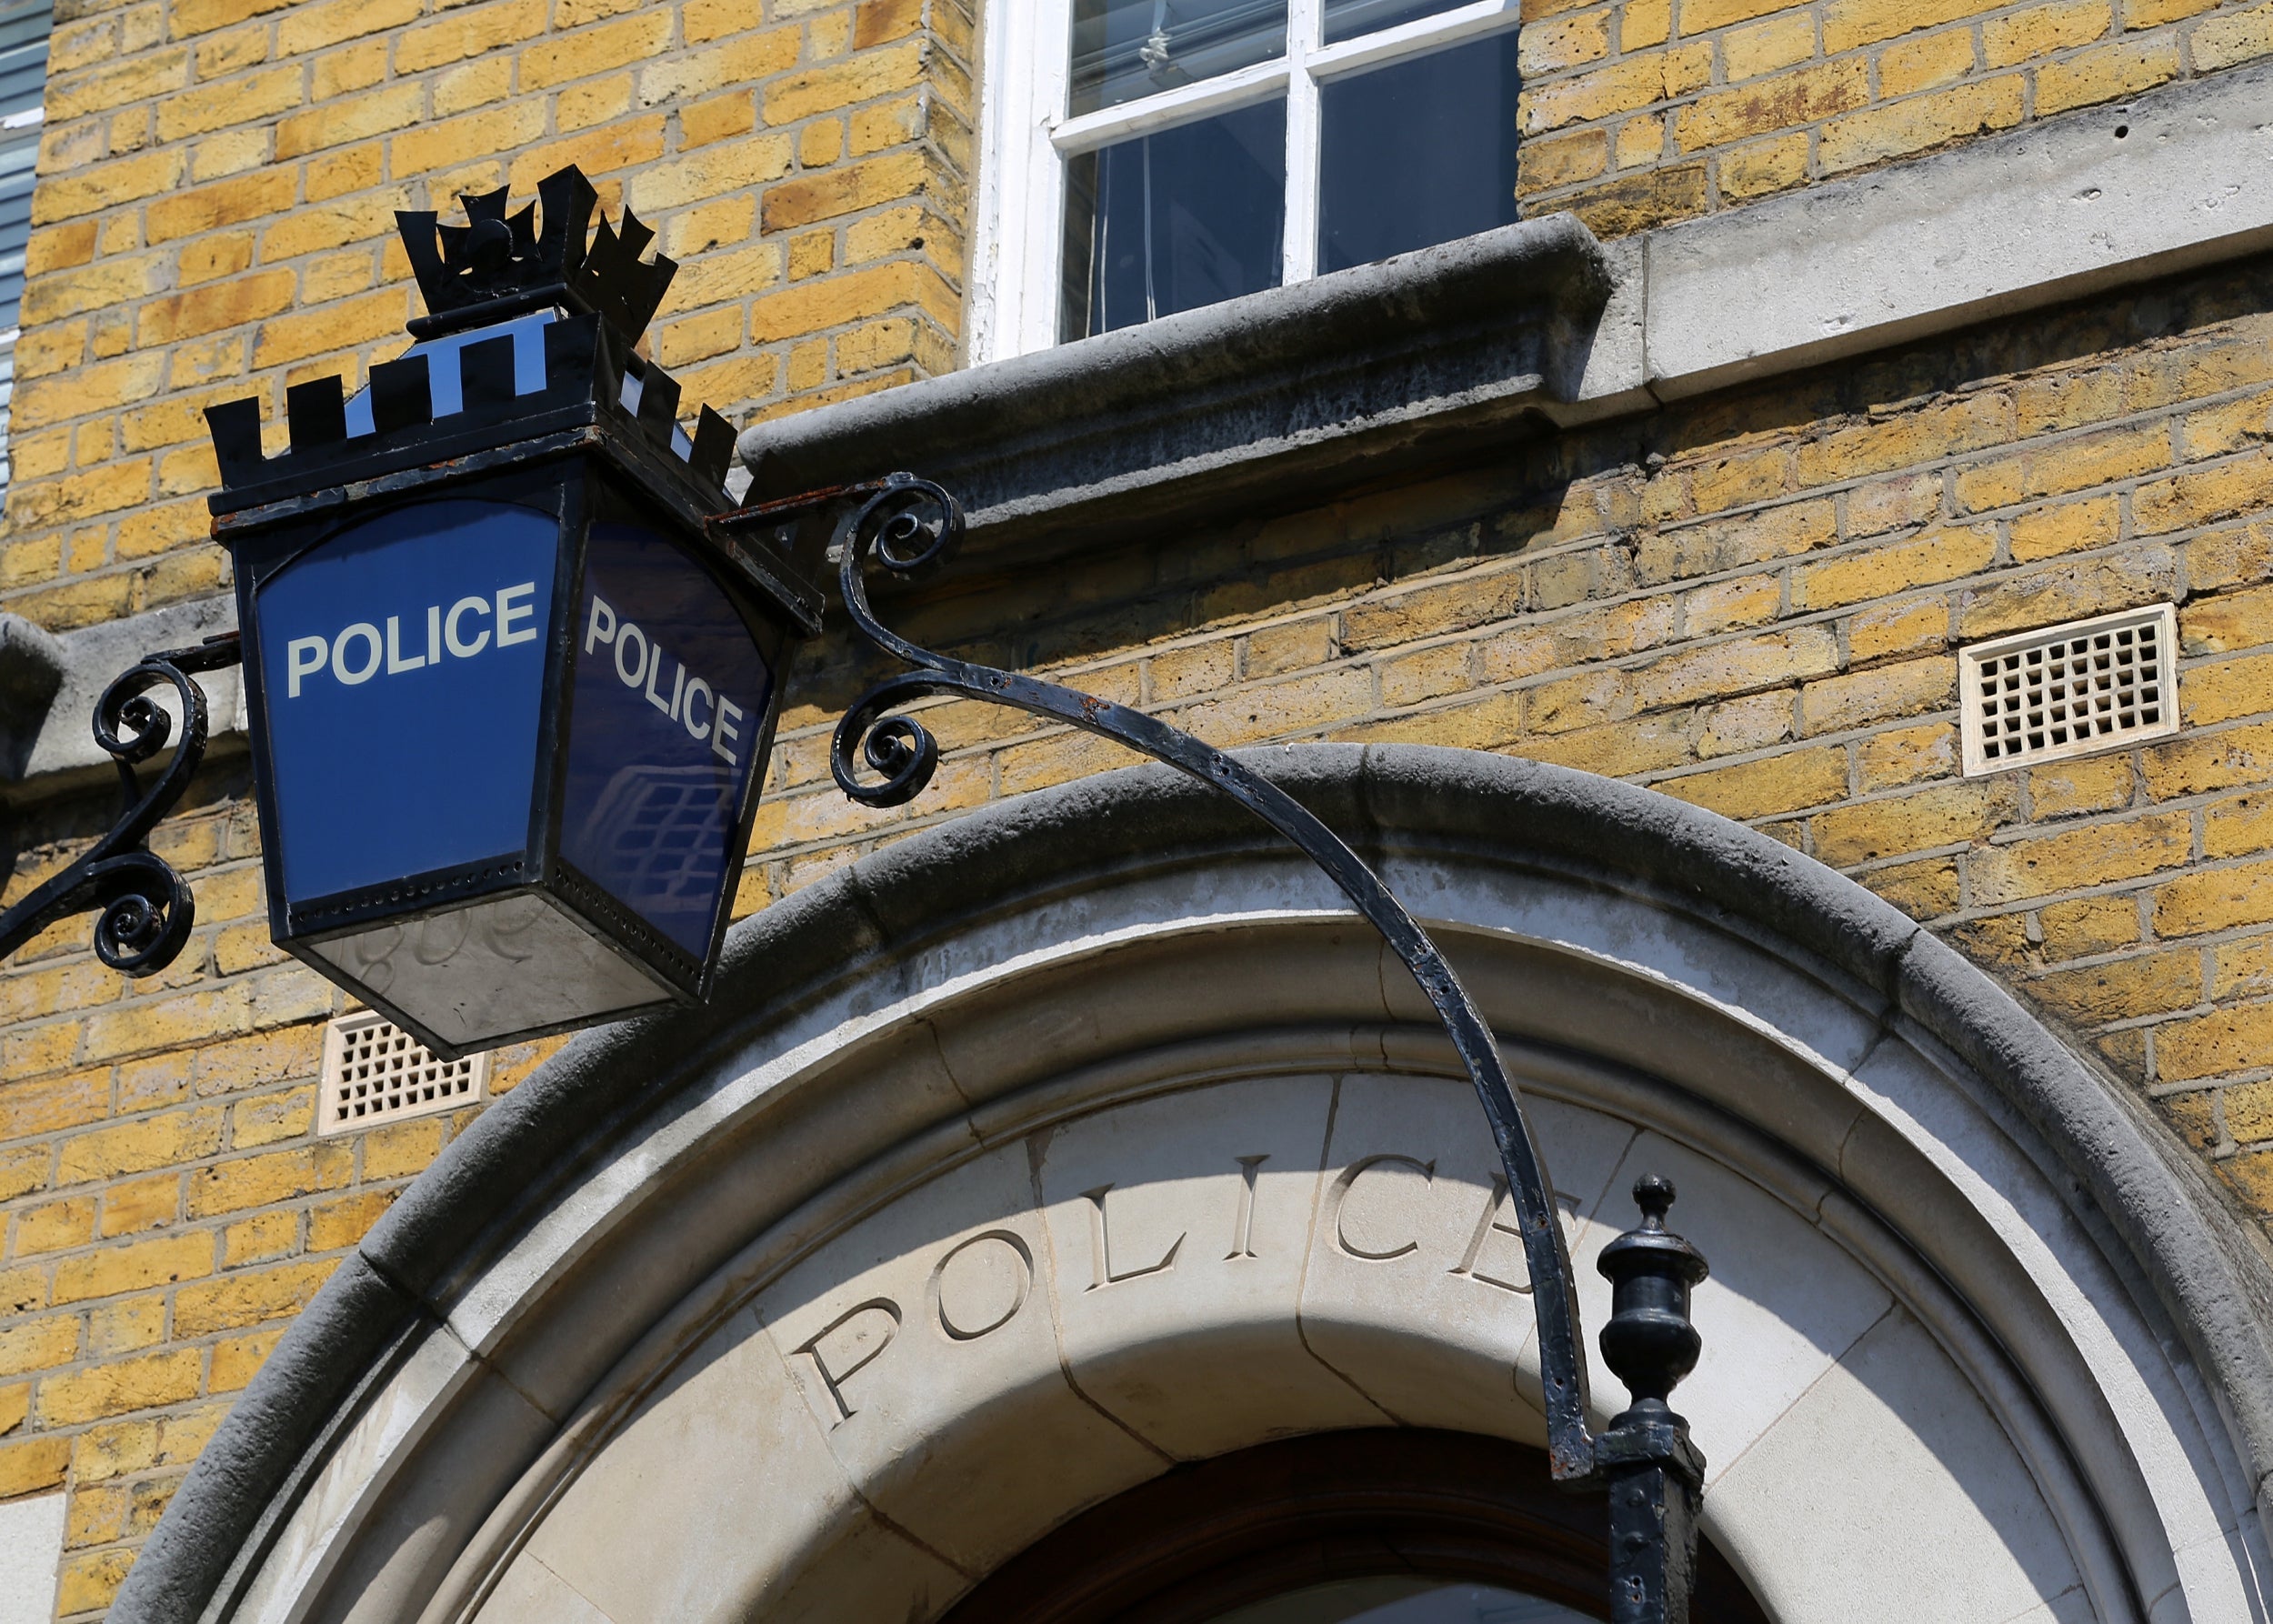 Police are among one of the authorities who received FOIs regarding their PFIs